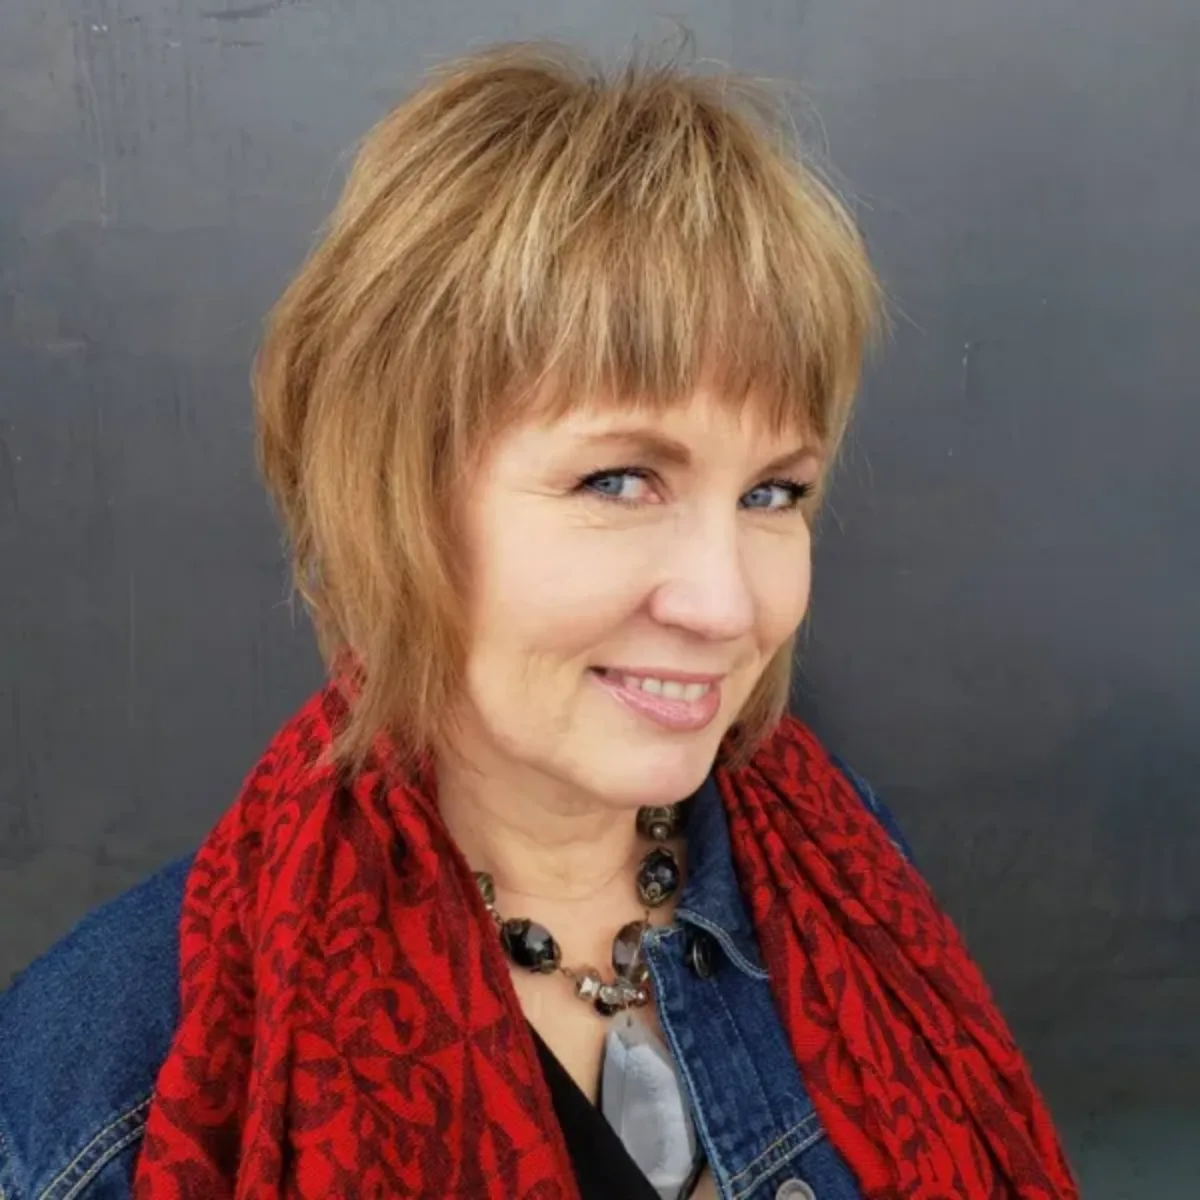 60 year old woman haircut model with bangs and blonde highlights